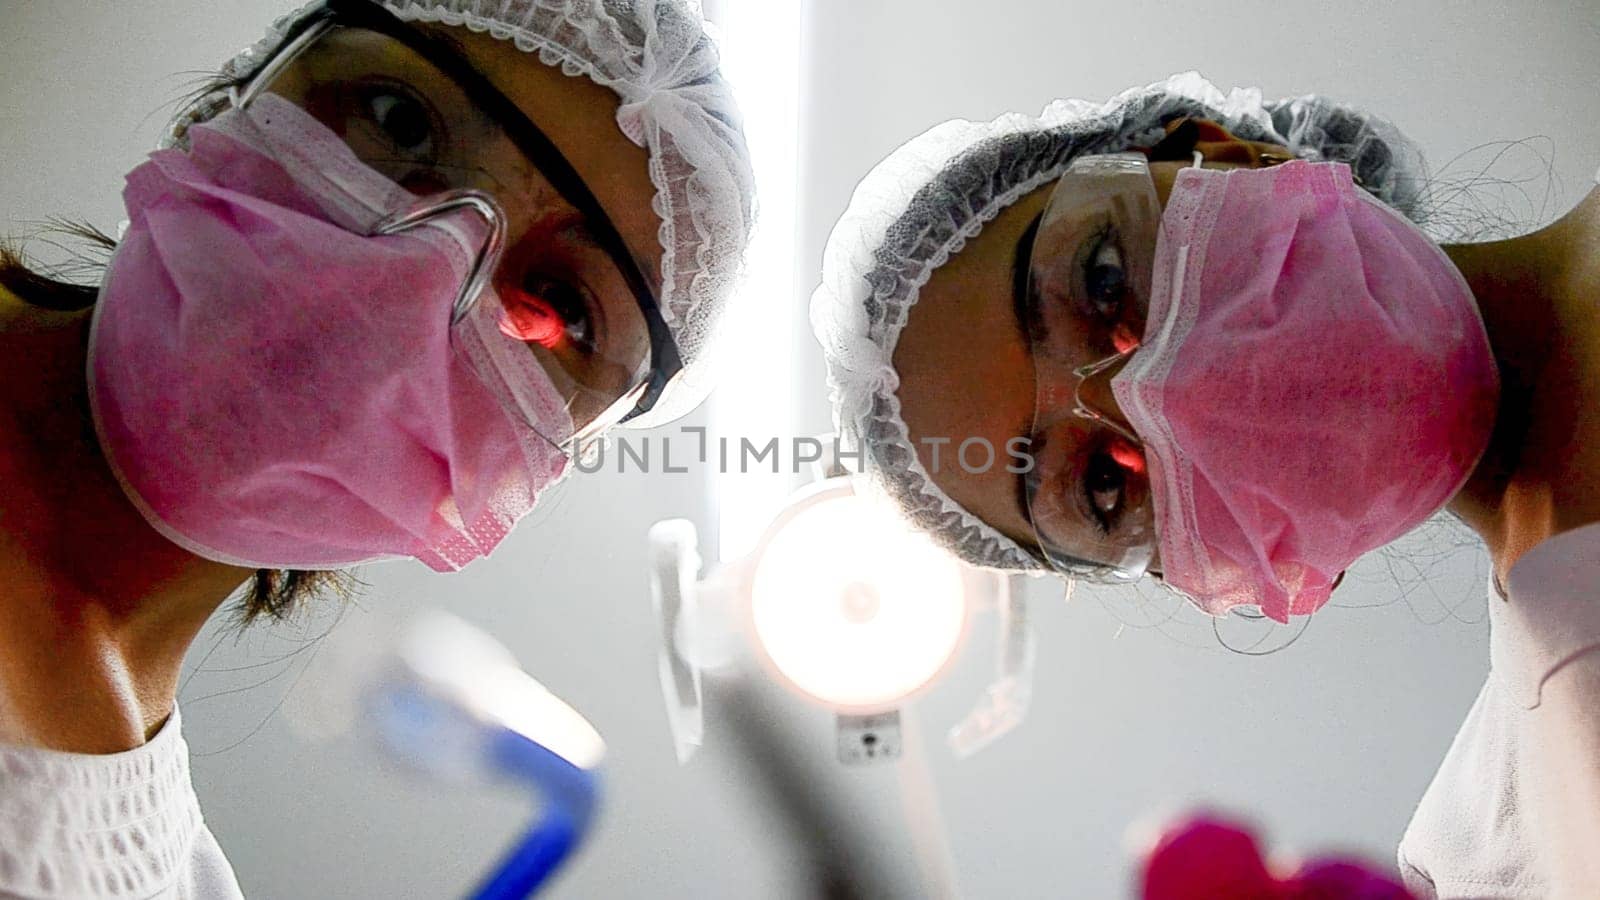 Low angle view of two healthcare professionals wearing surgical masks, seen from a patient's perspective